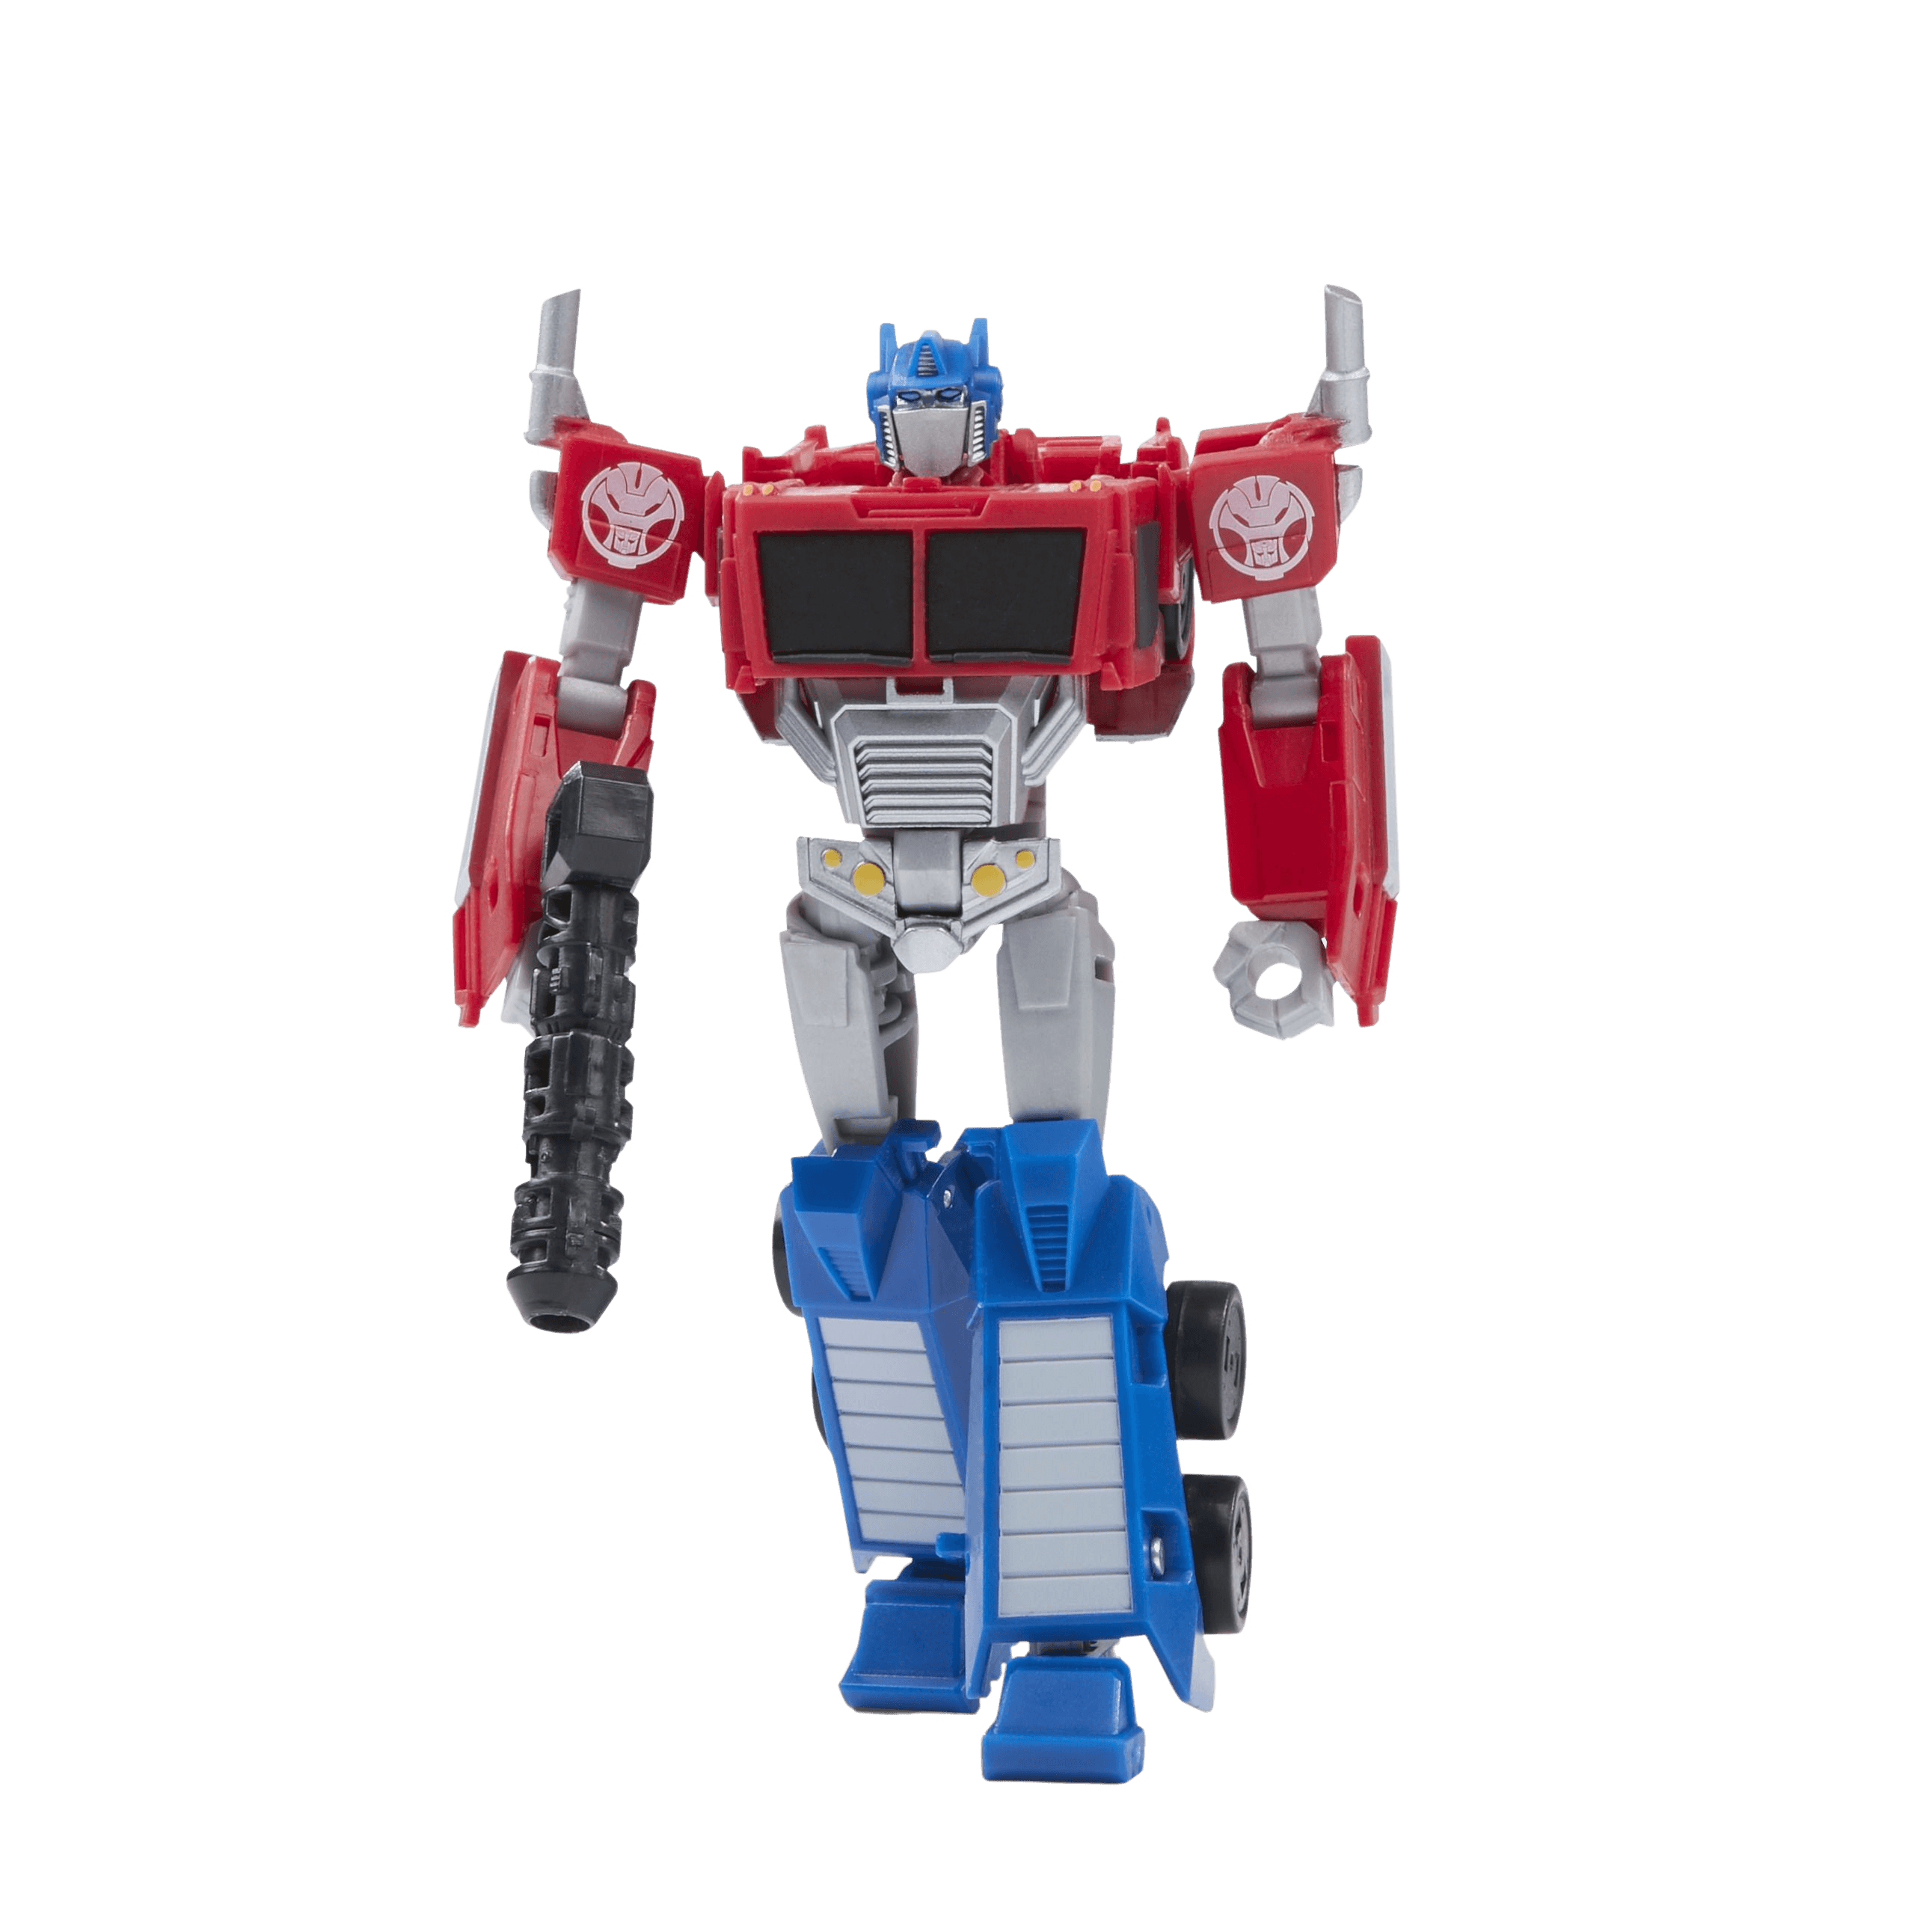 Hasbro - Transformers EarthSpark - Deluxe Optimus Prime Action Figure - The Card Vault